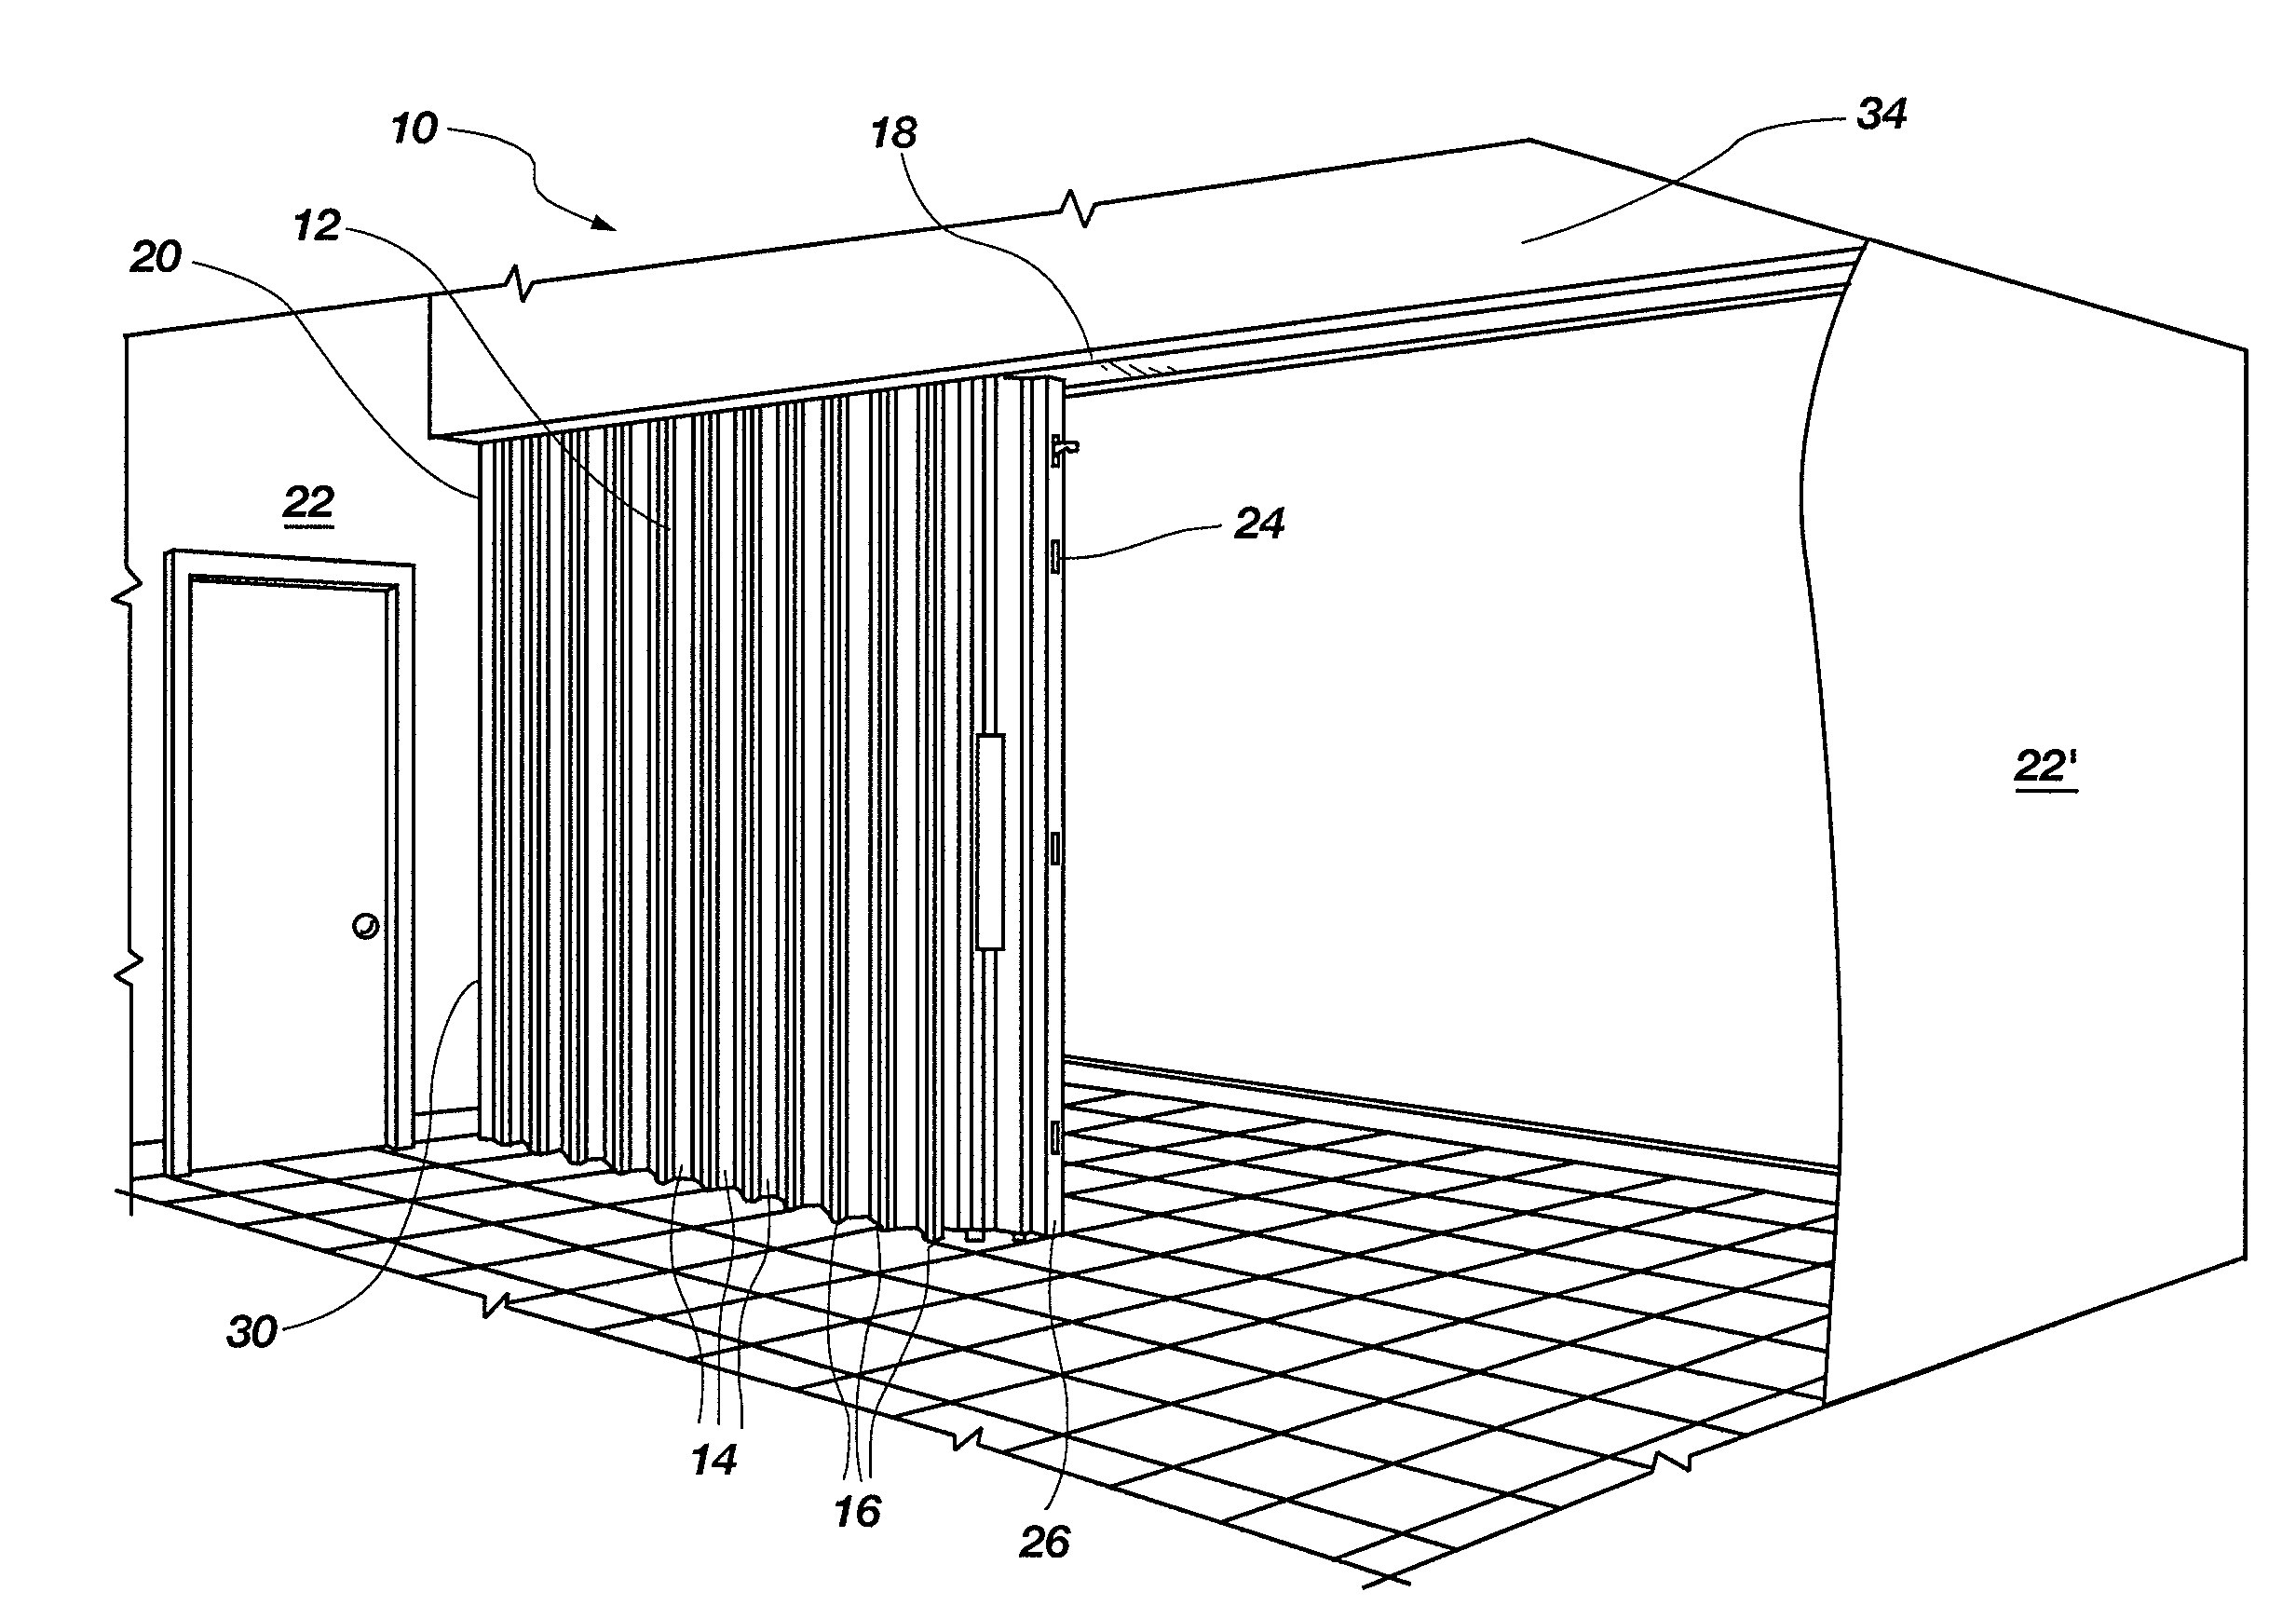 Movable partition systems including intumescent material and methods of controlling and directing intumescent material around the perimeter of a movable partition system